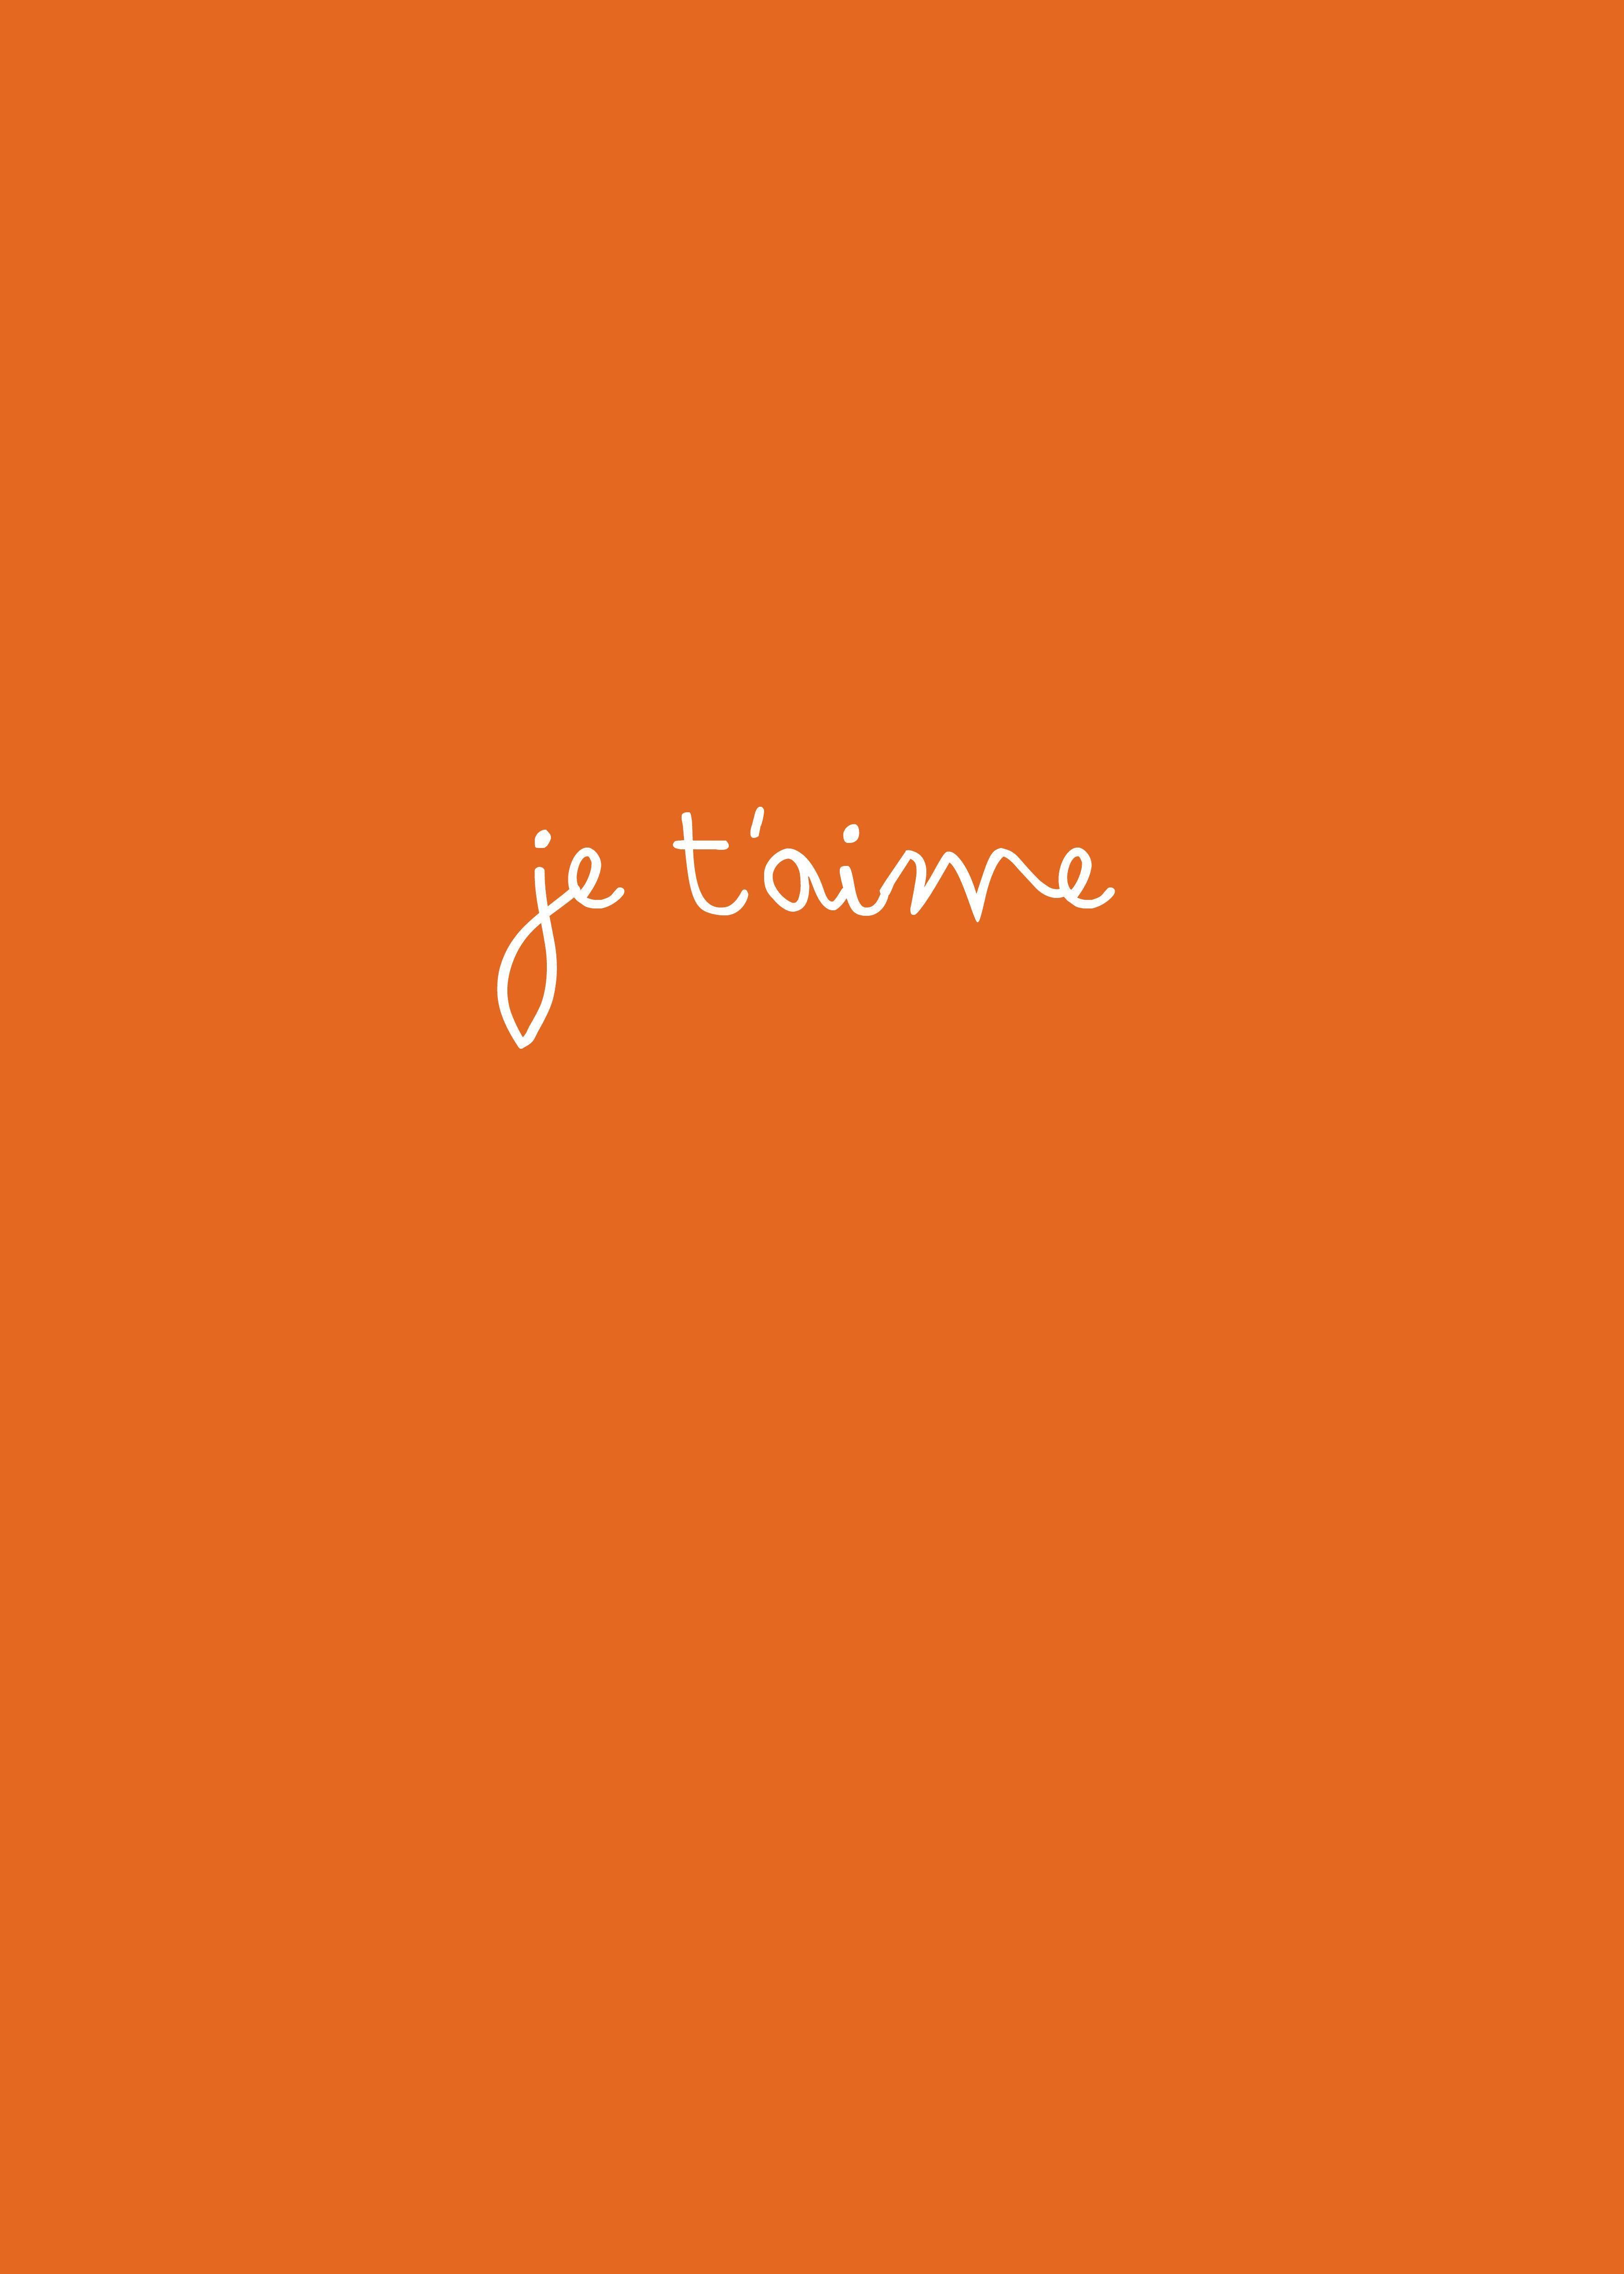 A close up of an orange background with white text - Orange